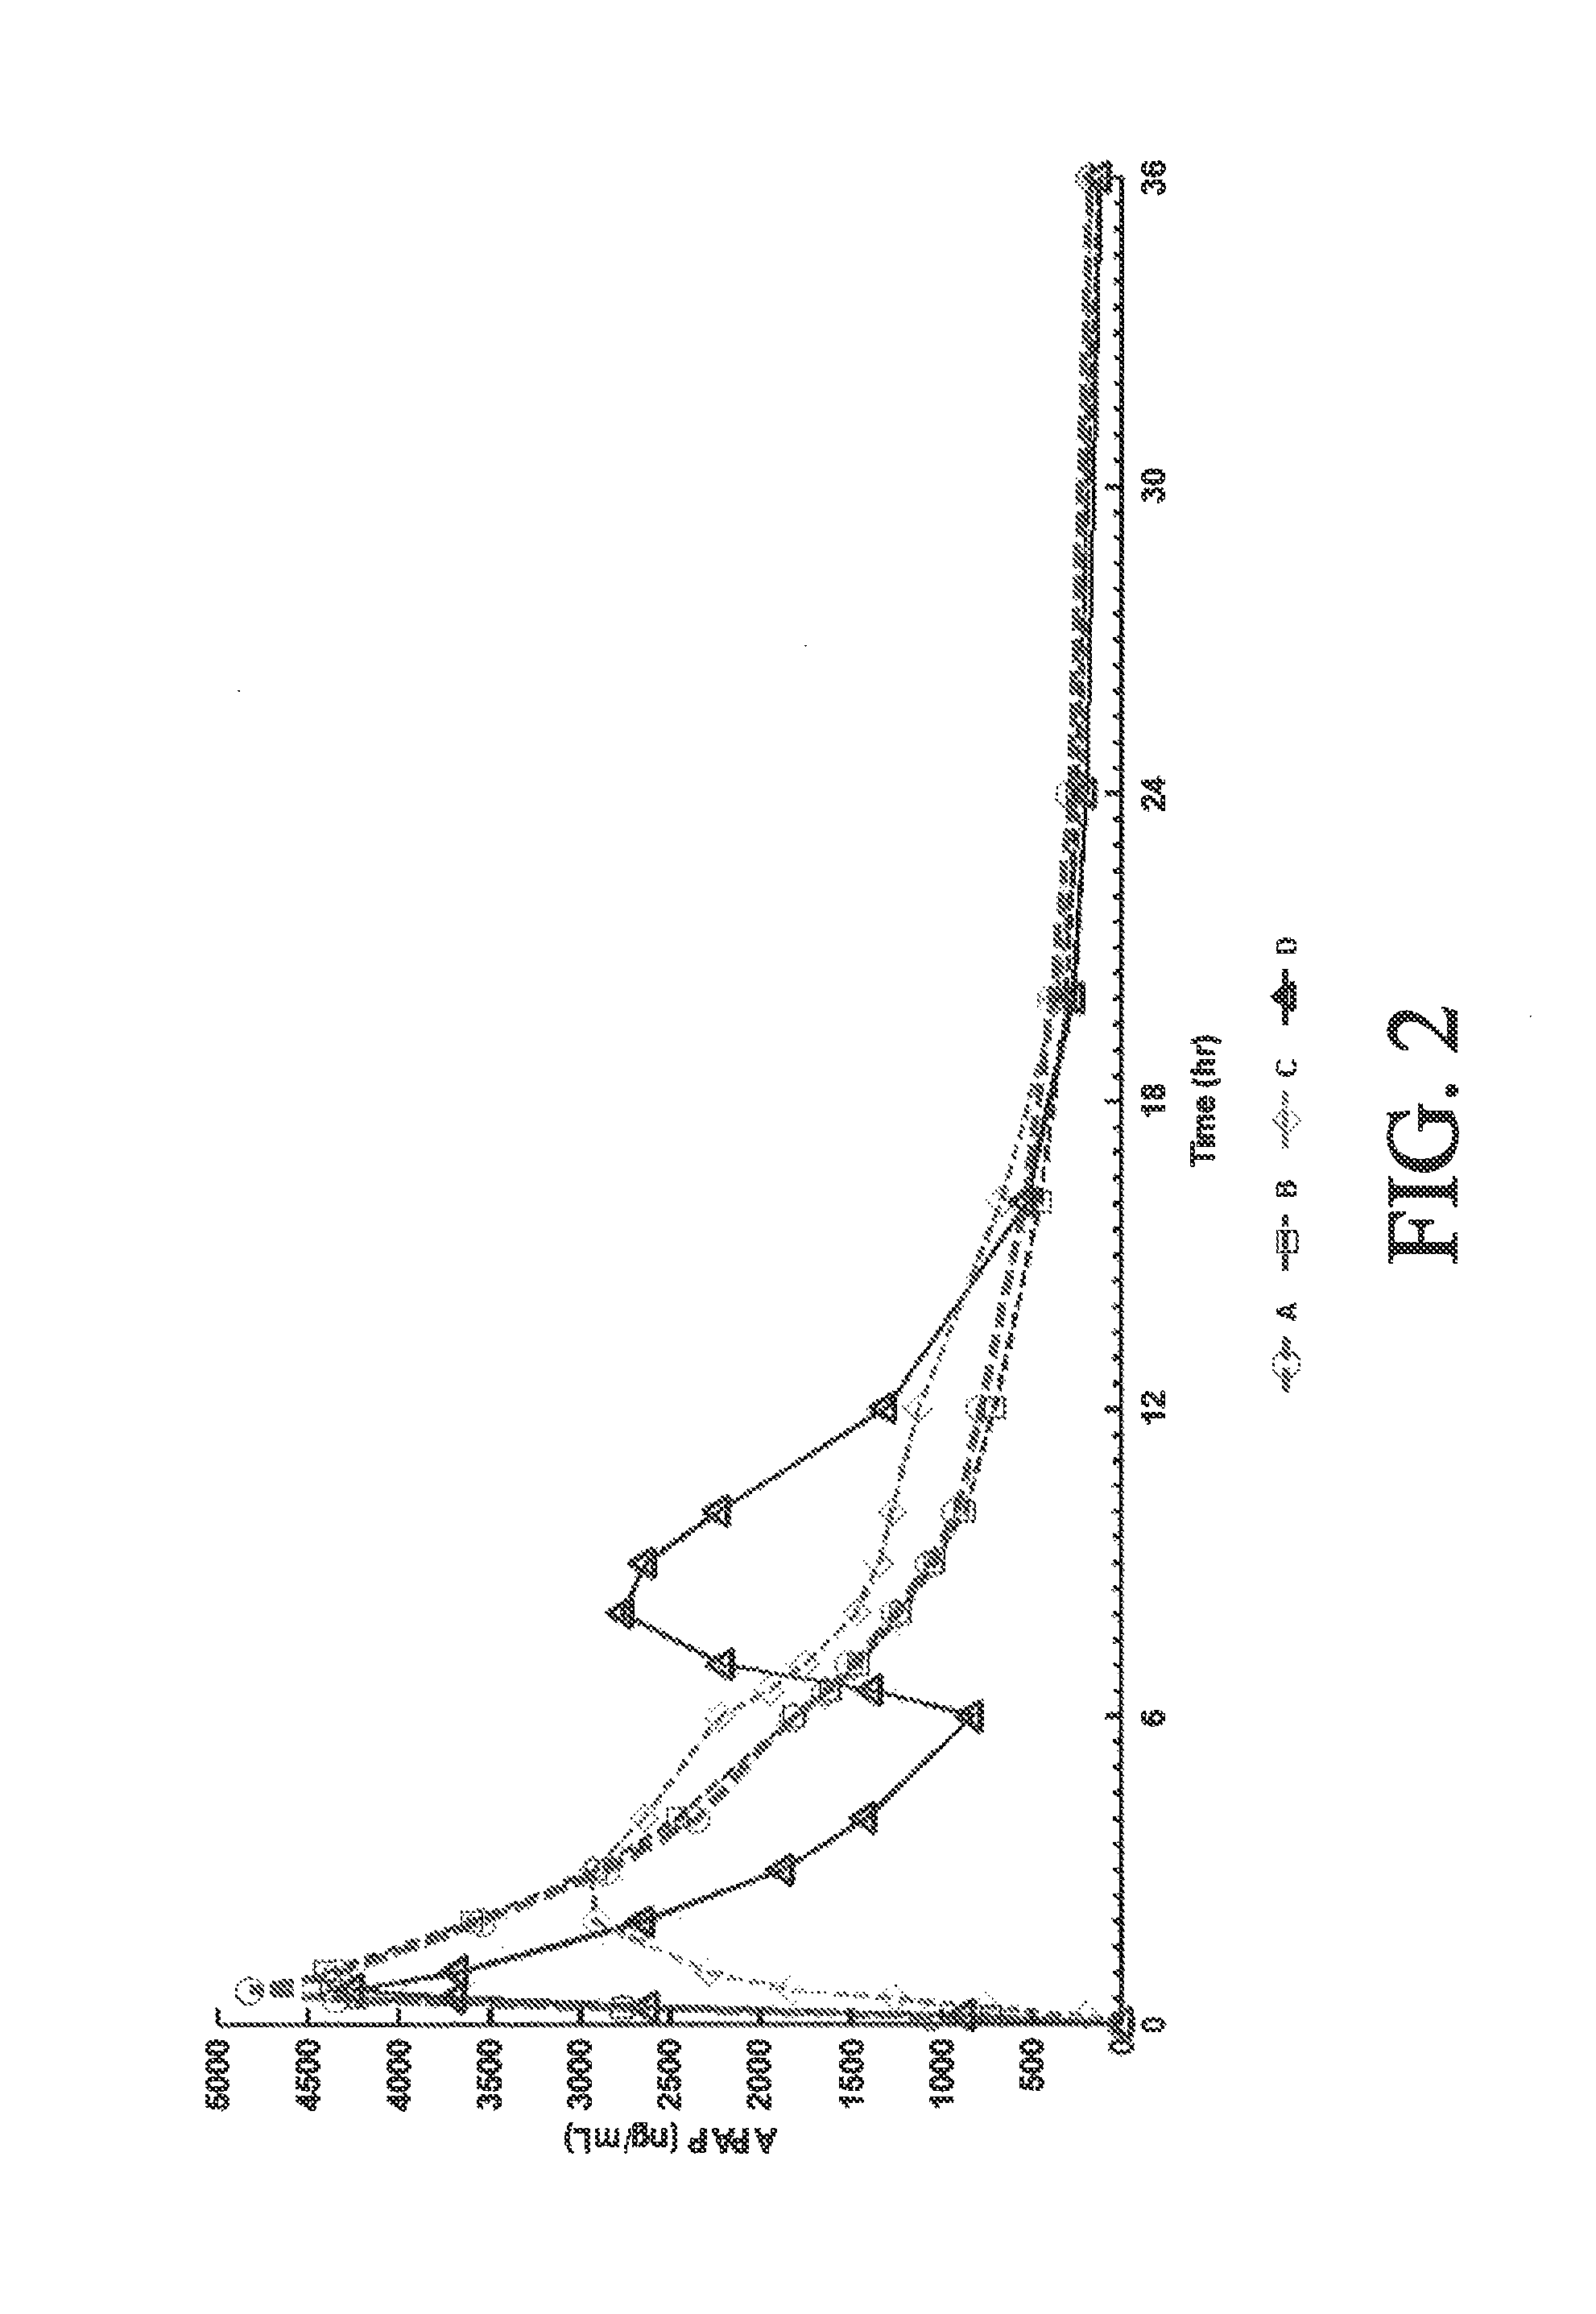 Tamper resistant composition comprising hydrocodone and acetaminophen for rapid onset and extended duration of analgesia